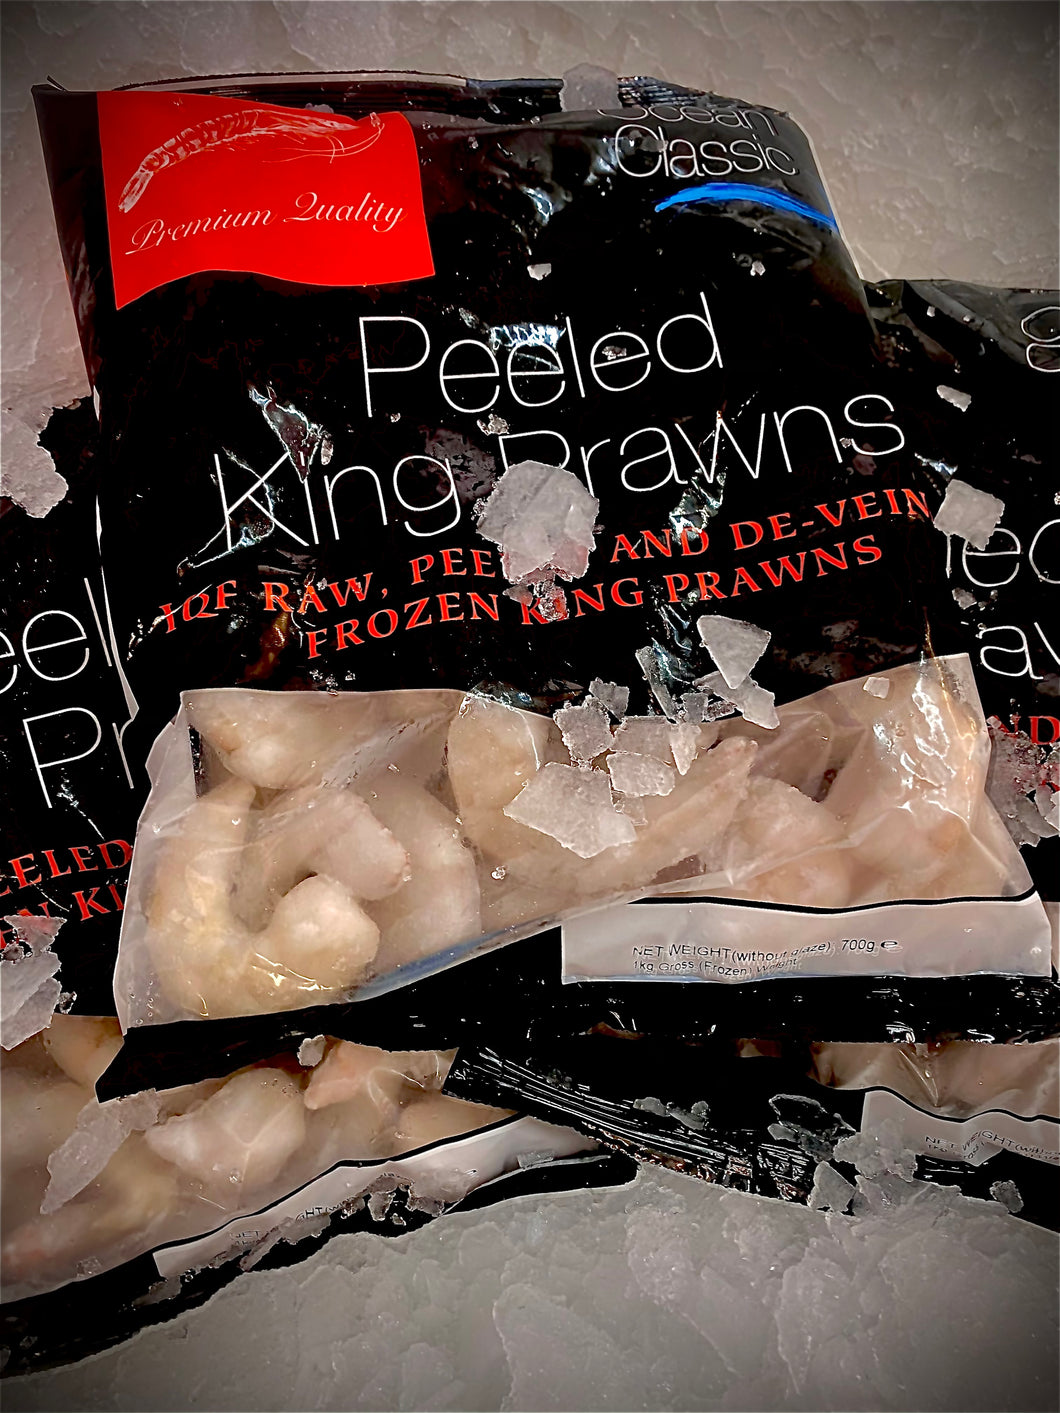 Ocean Classic Premium Quality peeled King Prawns, Net weight 700g. Marisco Fish - Cornwall's finest seafood.